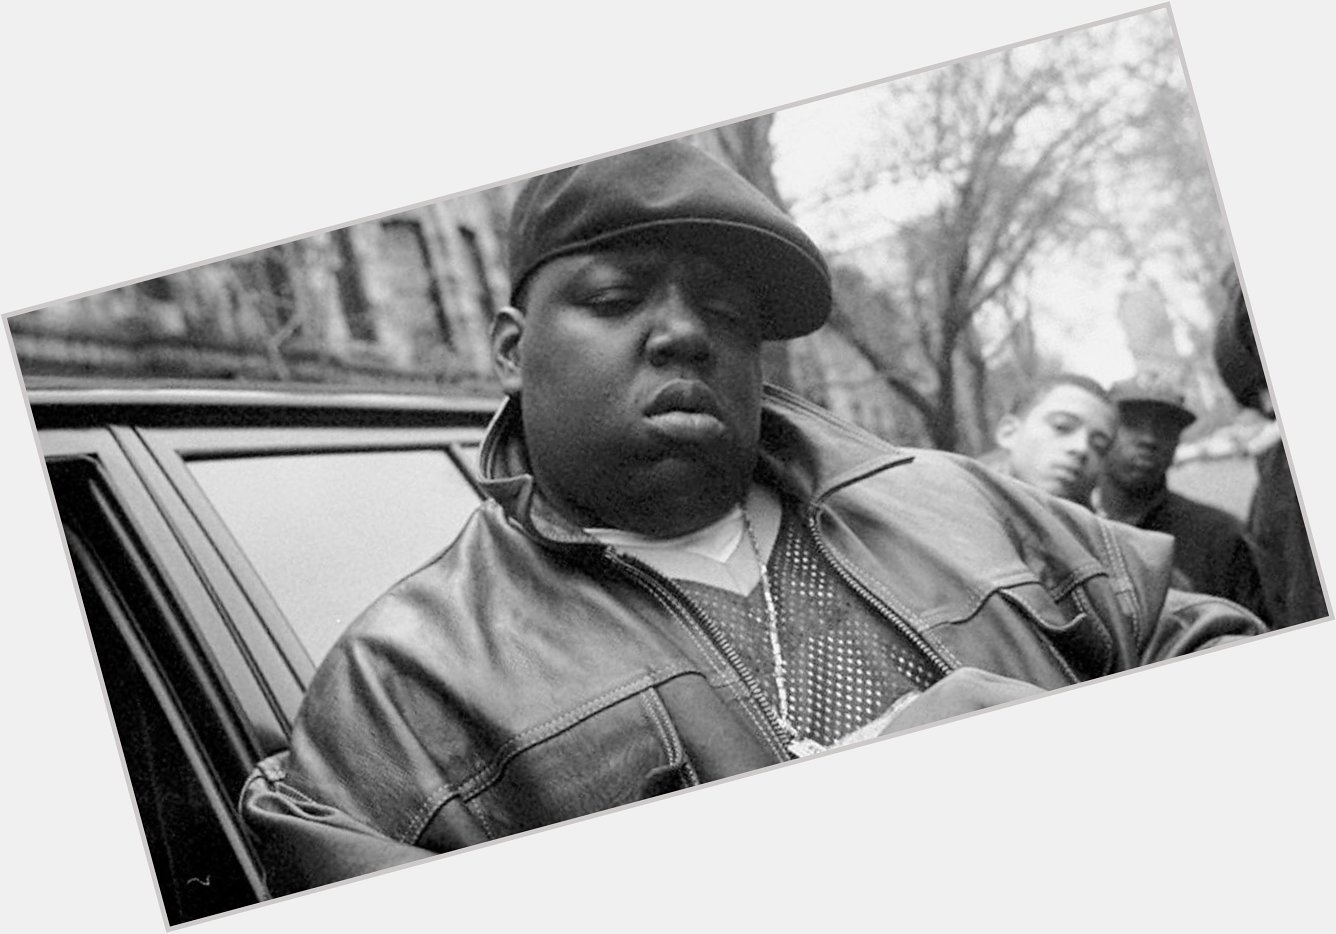 Happy Birthday to The Notorious B.I.G. He would have been 47 today. What s your favorite song from Big? 